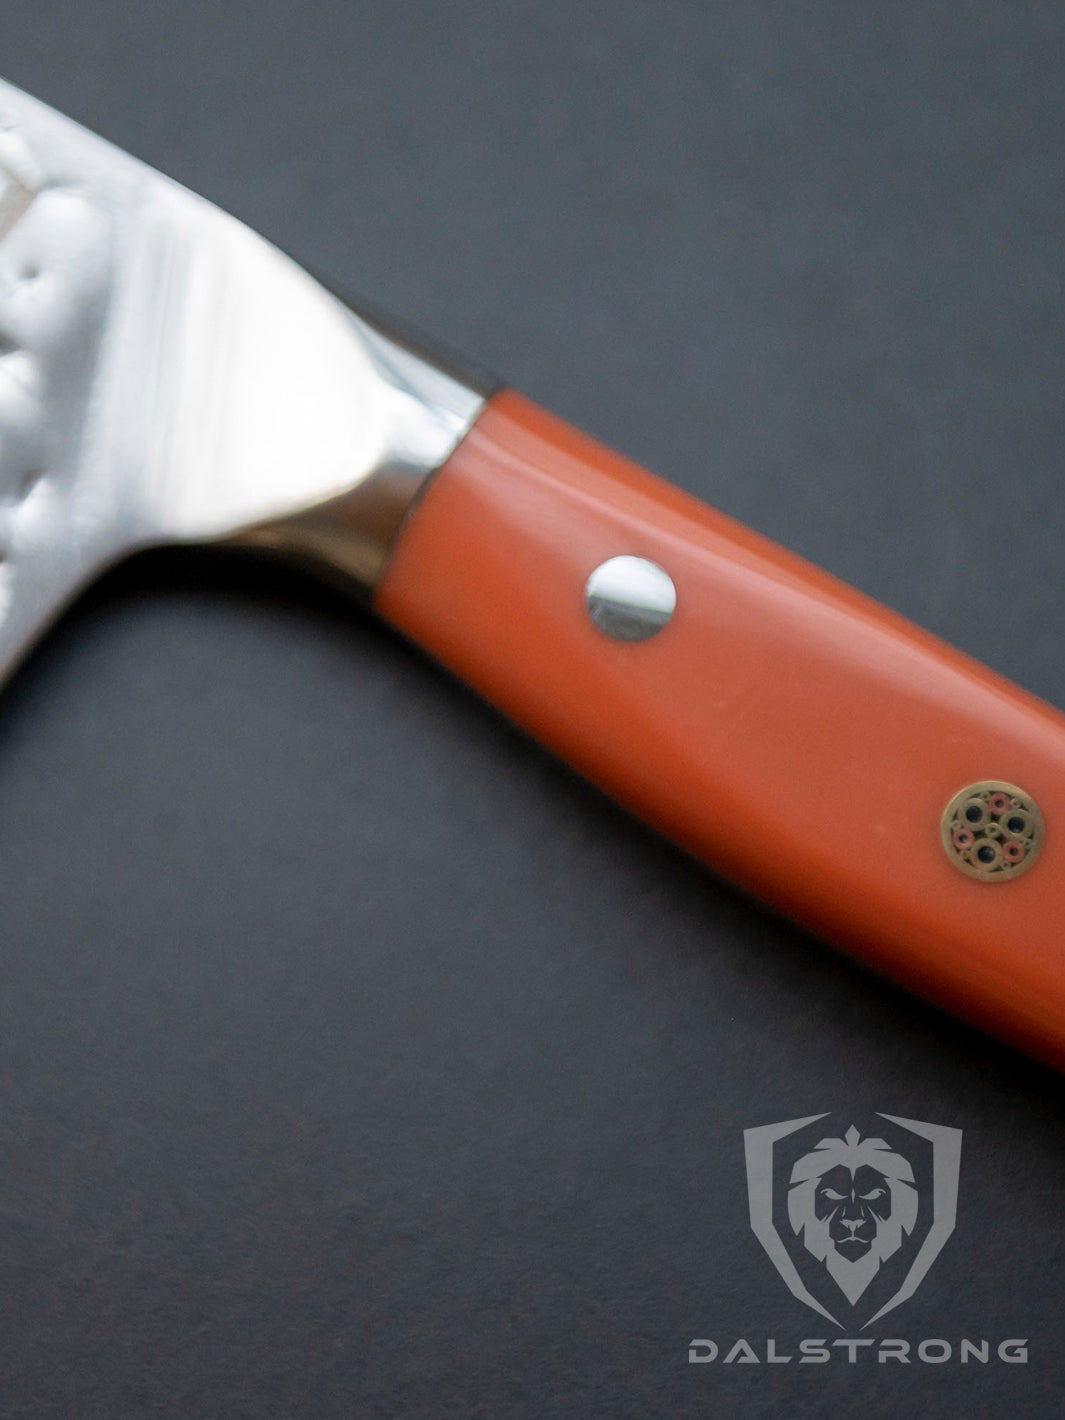 Dalstrong shogun series 8 inch chef knife showcasing it's ergonomic flame orange handle and tang.